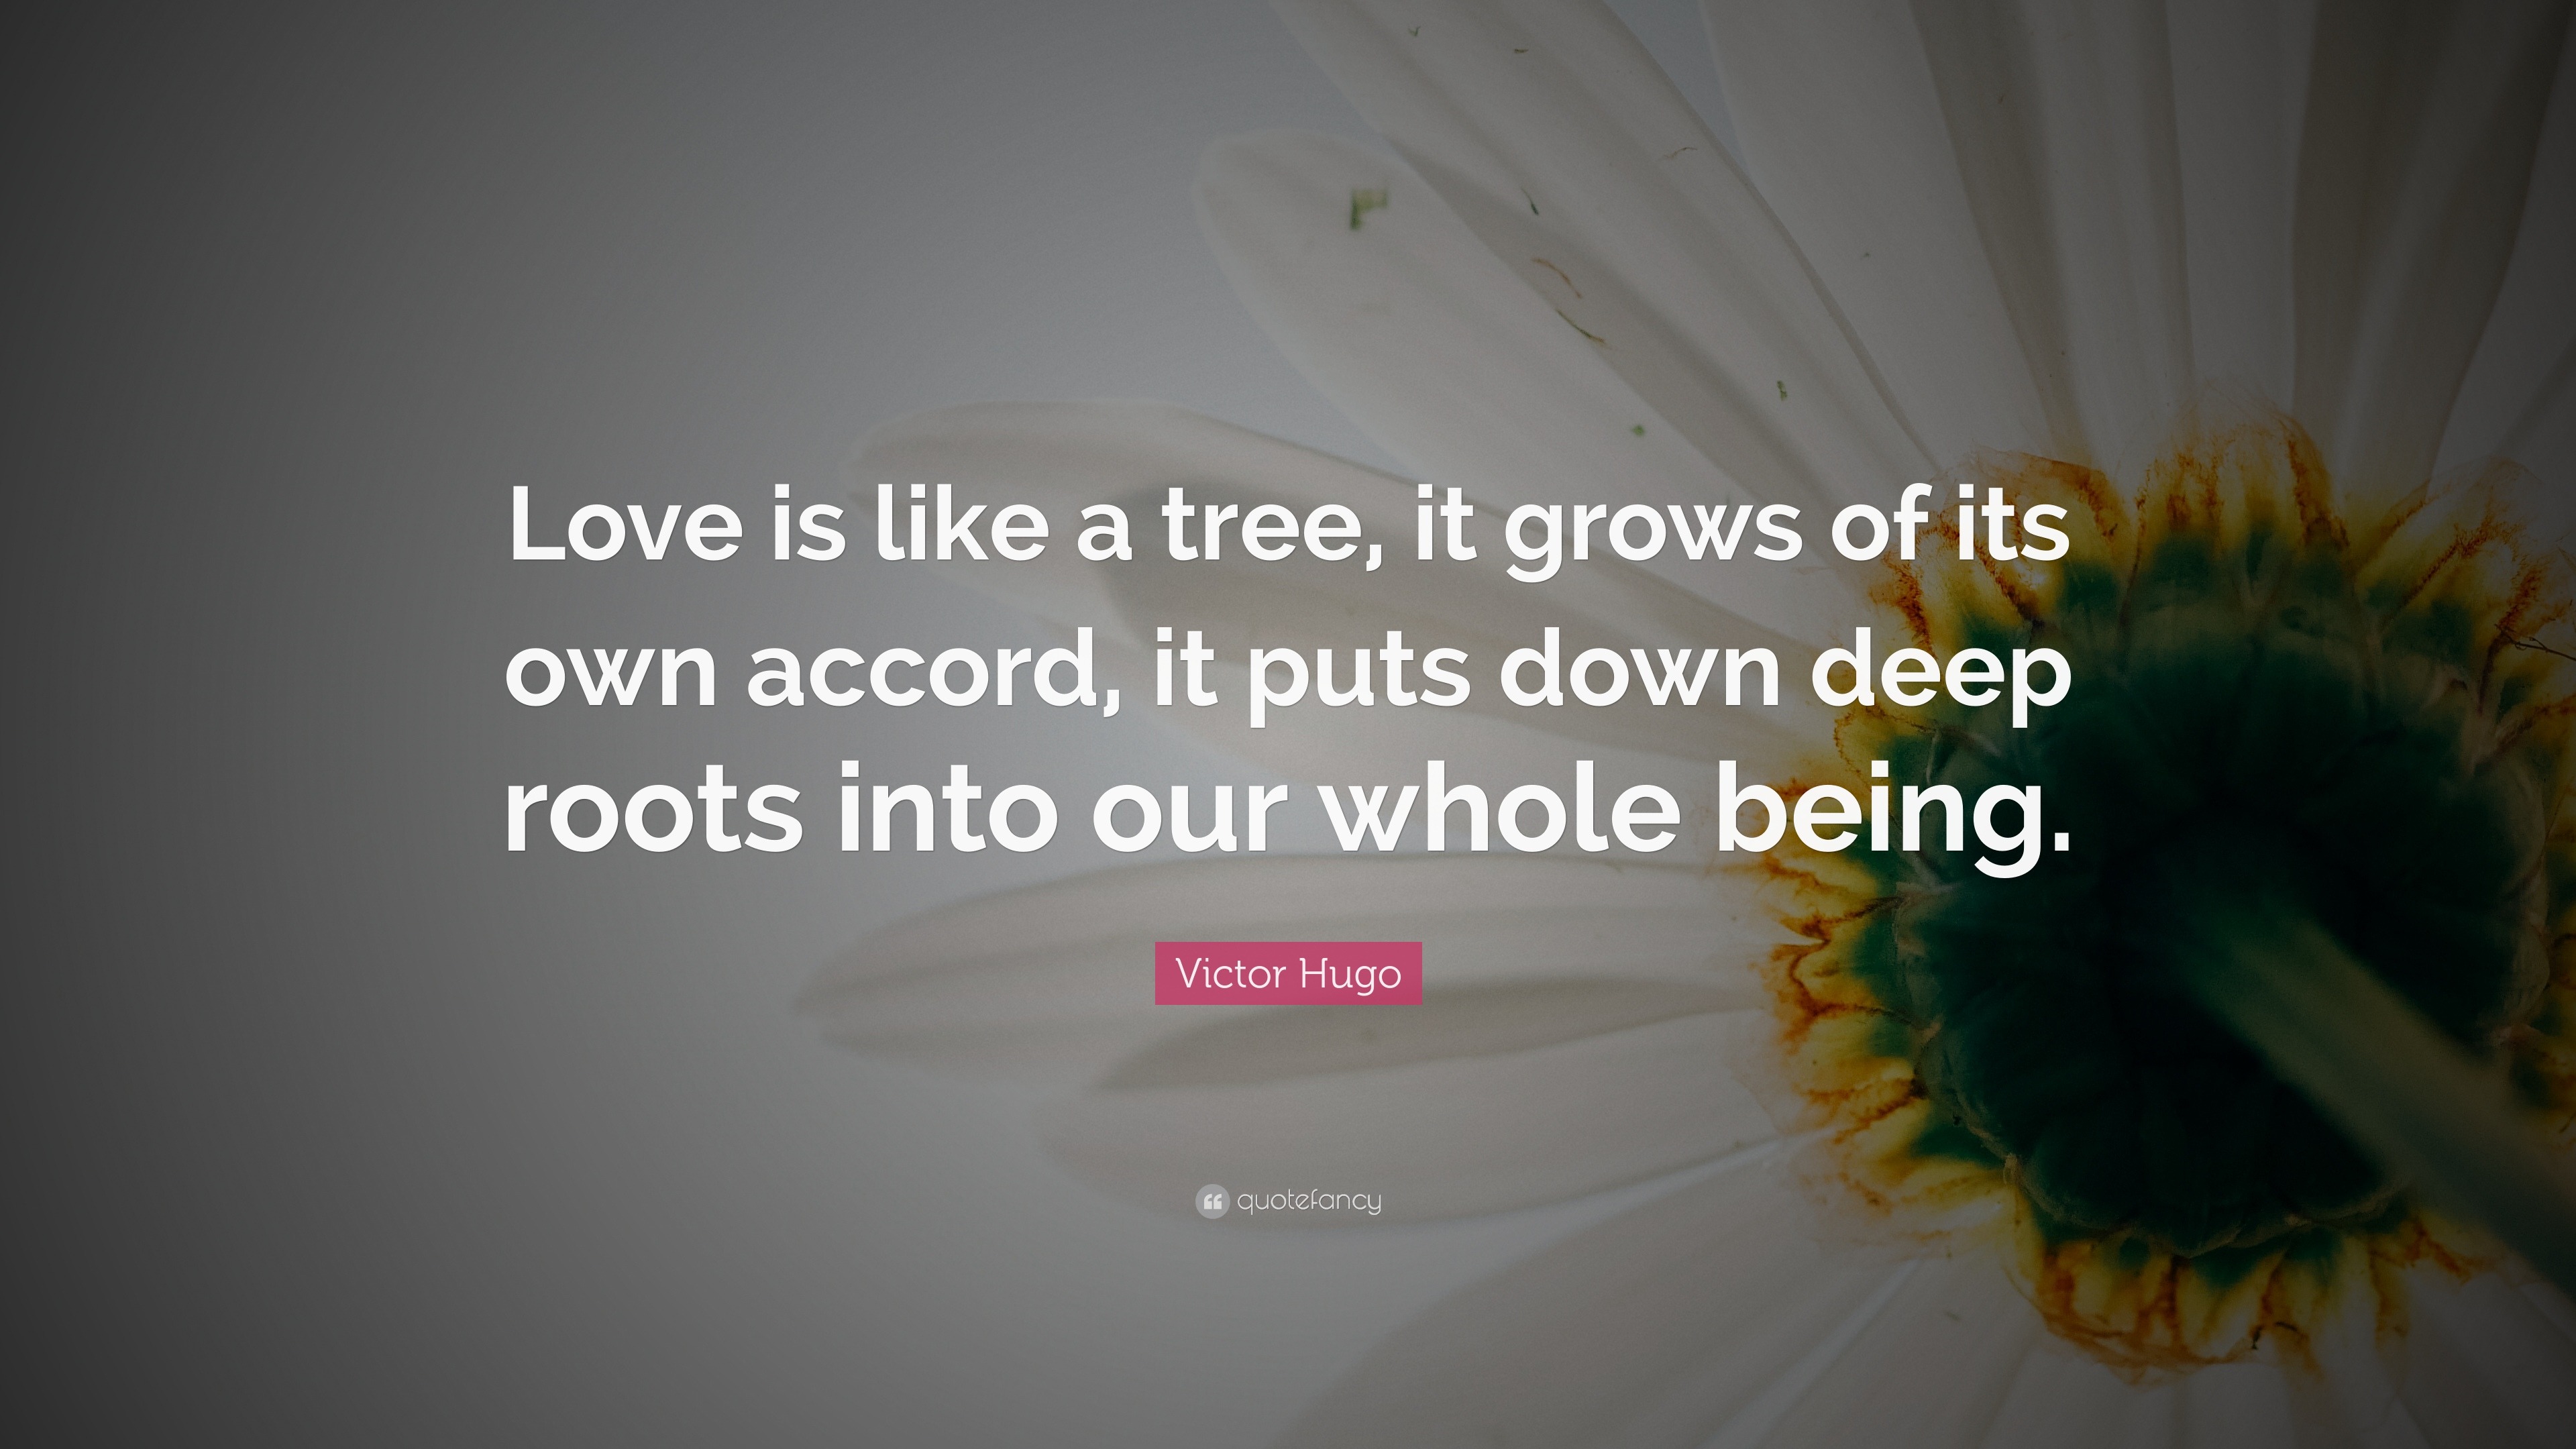 Victor Hugo Quote “Love is like a tree it grows of its own